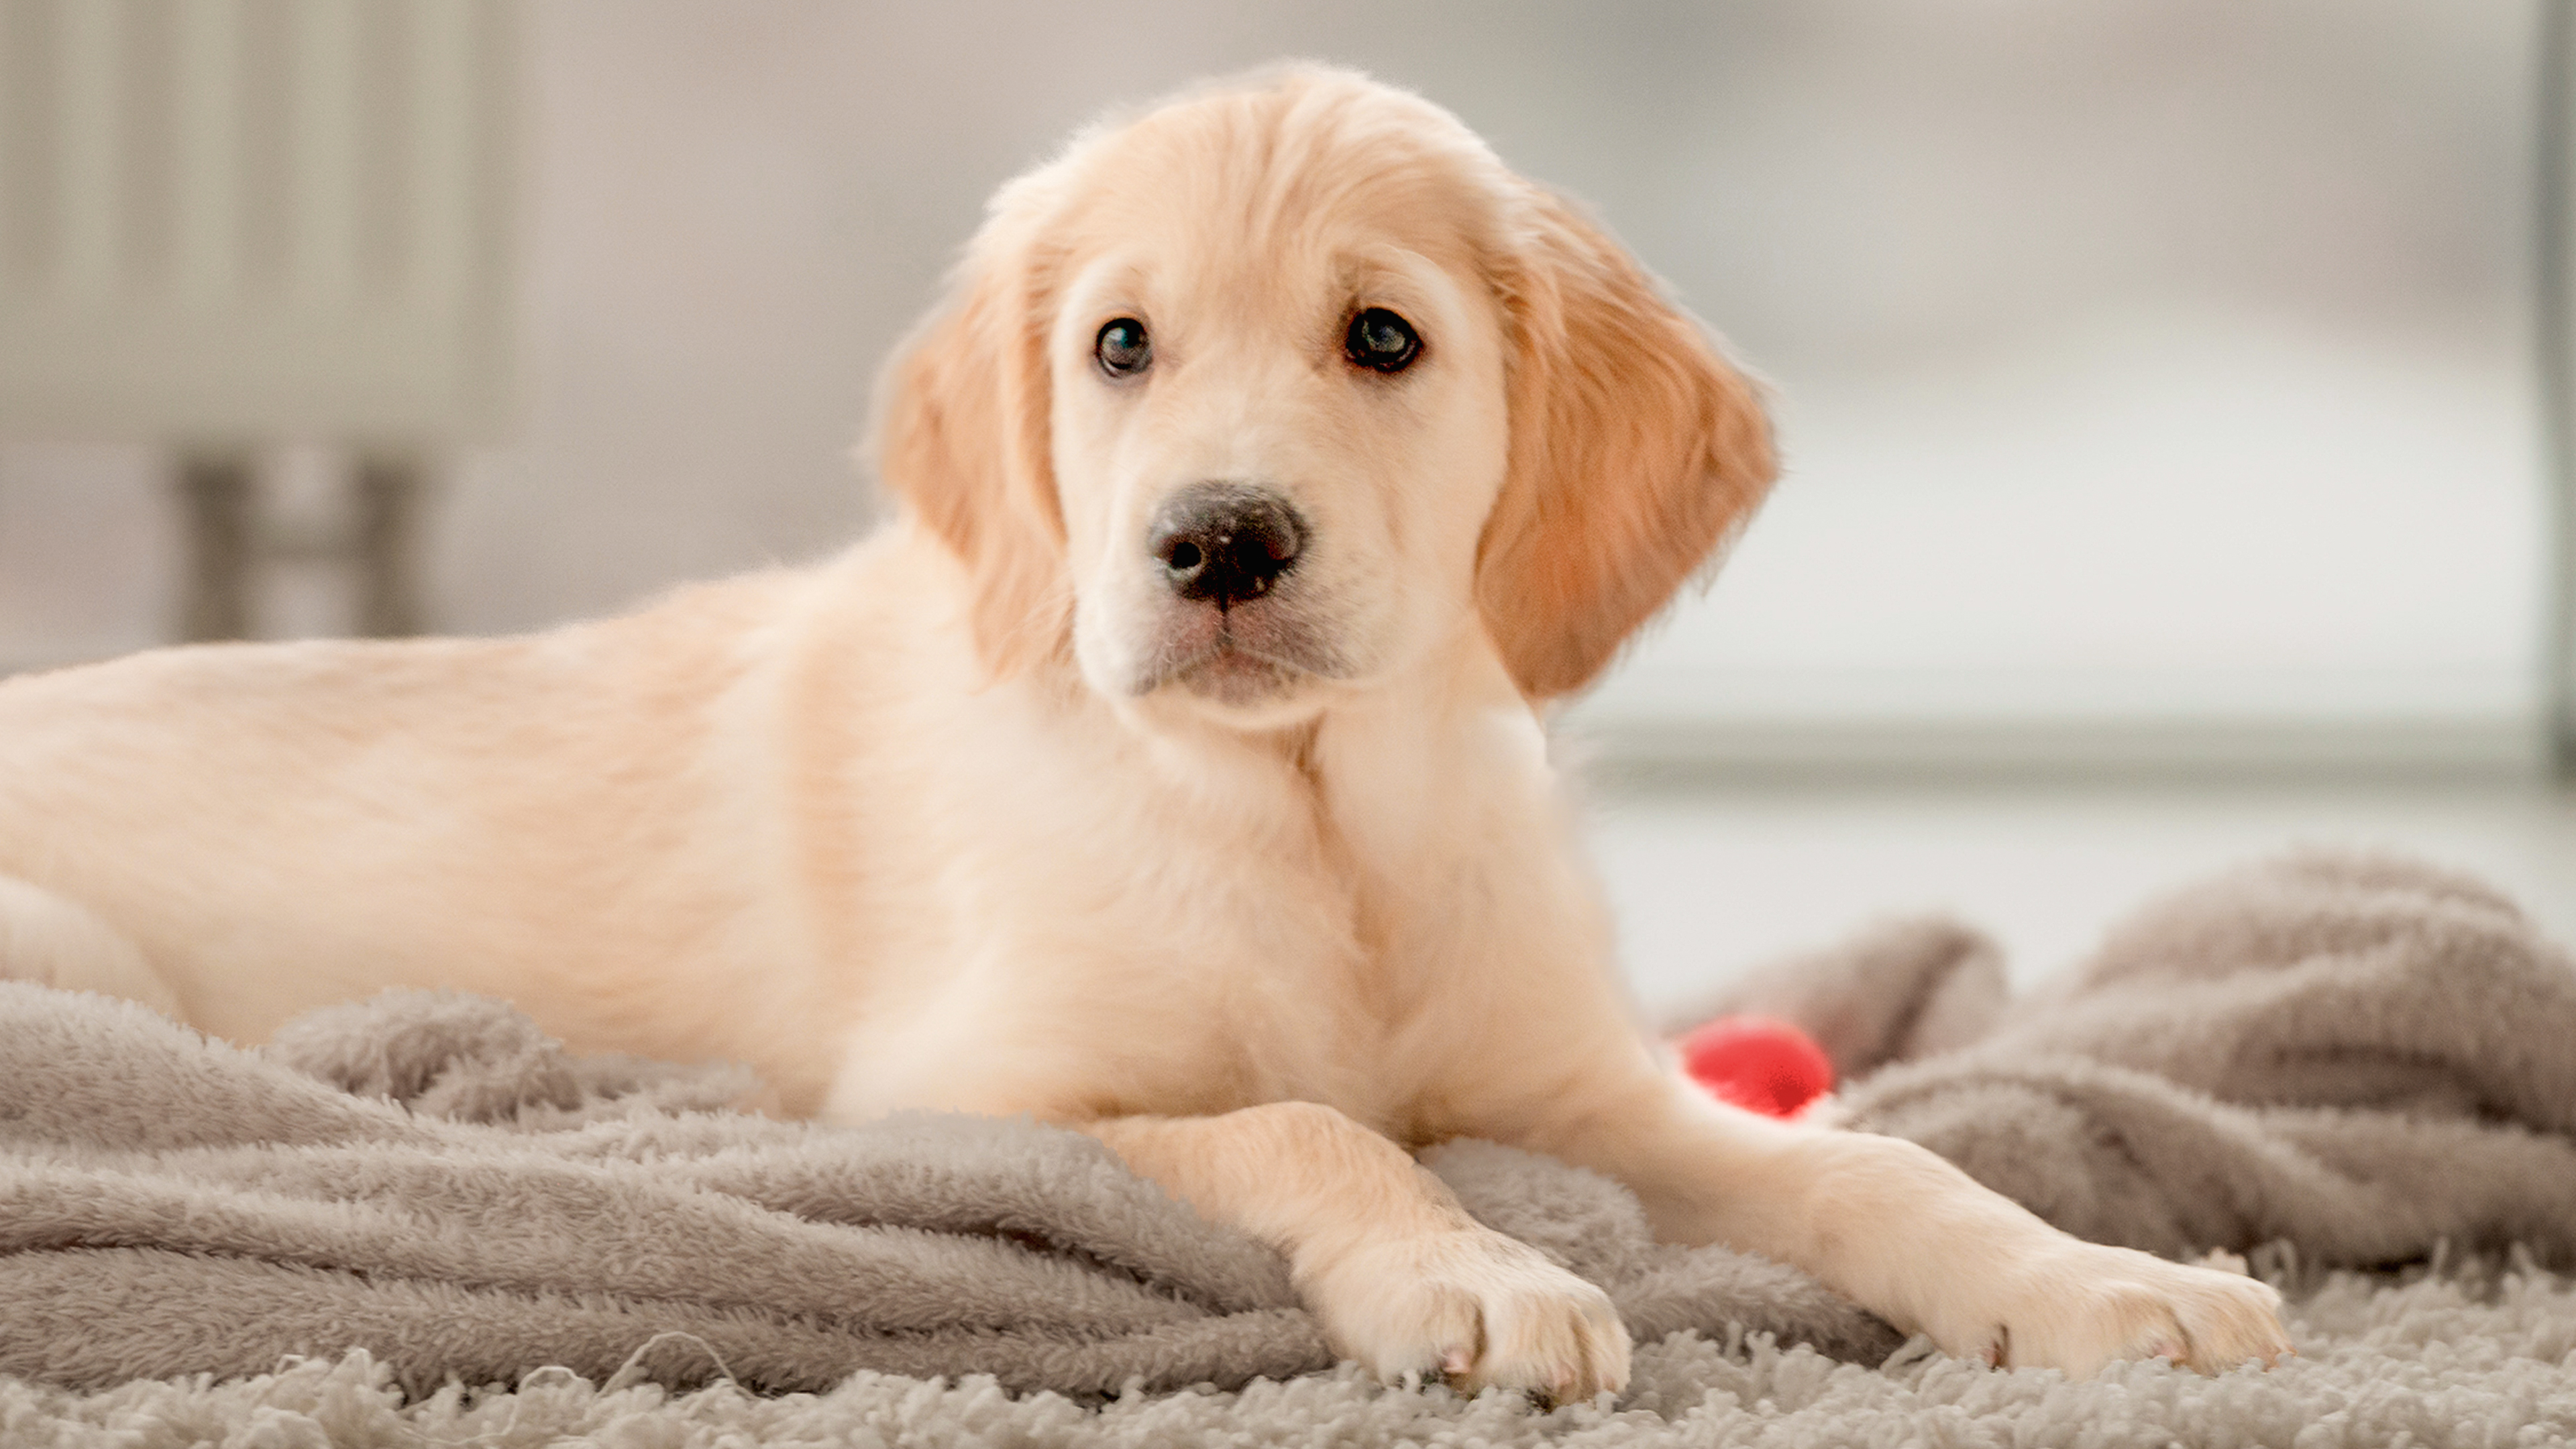 Golden retriever puppy indoors lying down on a cream towel next to a stainless steel feeding bowl